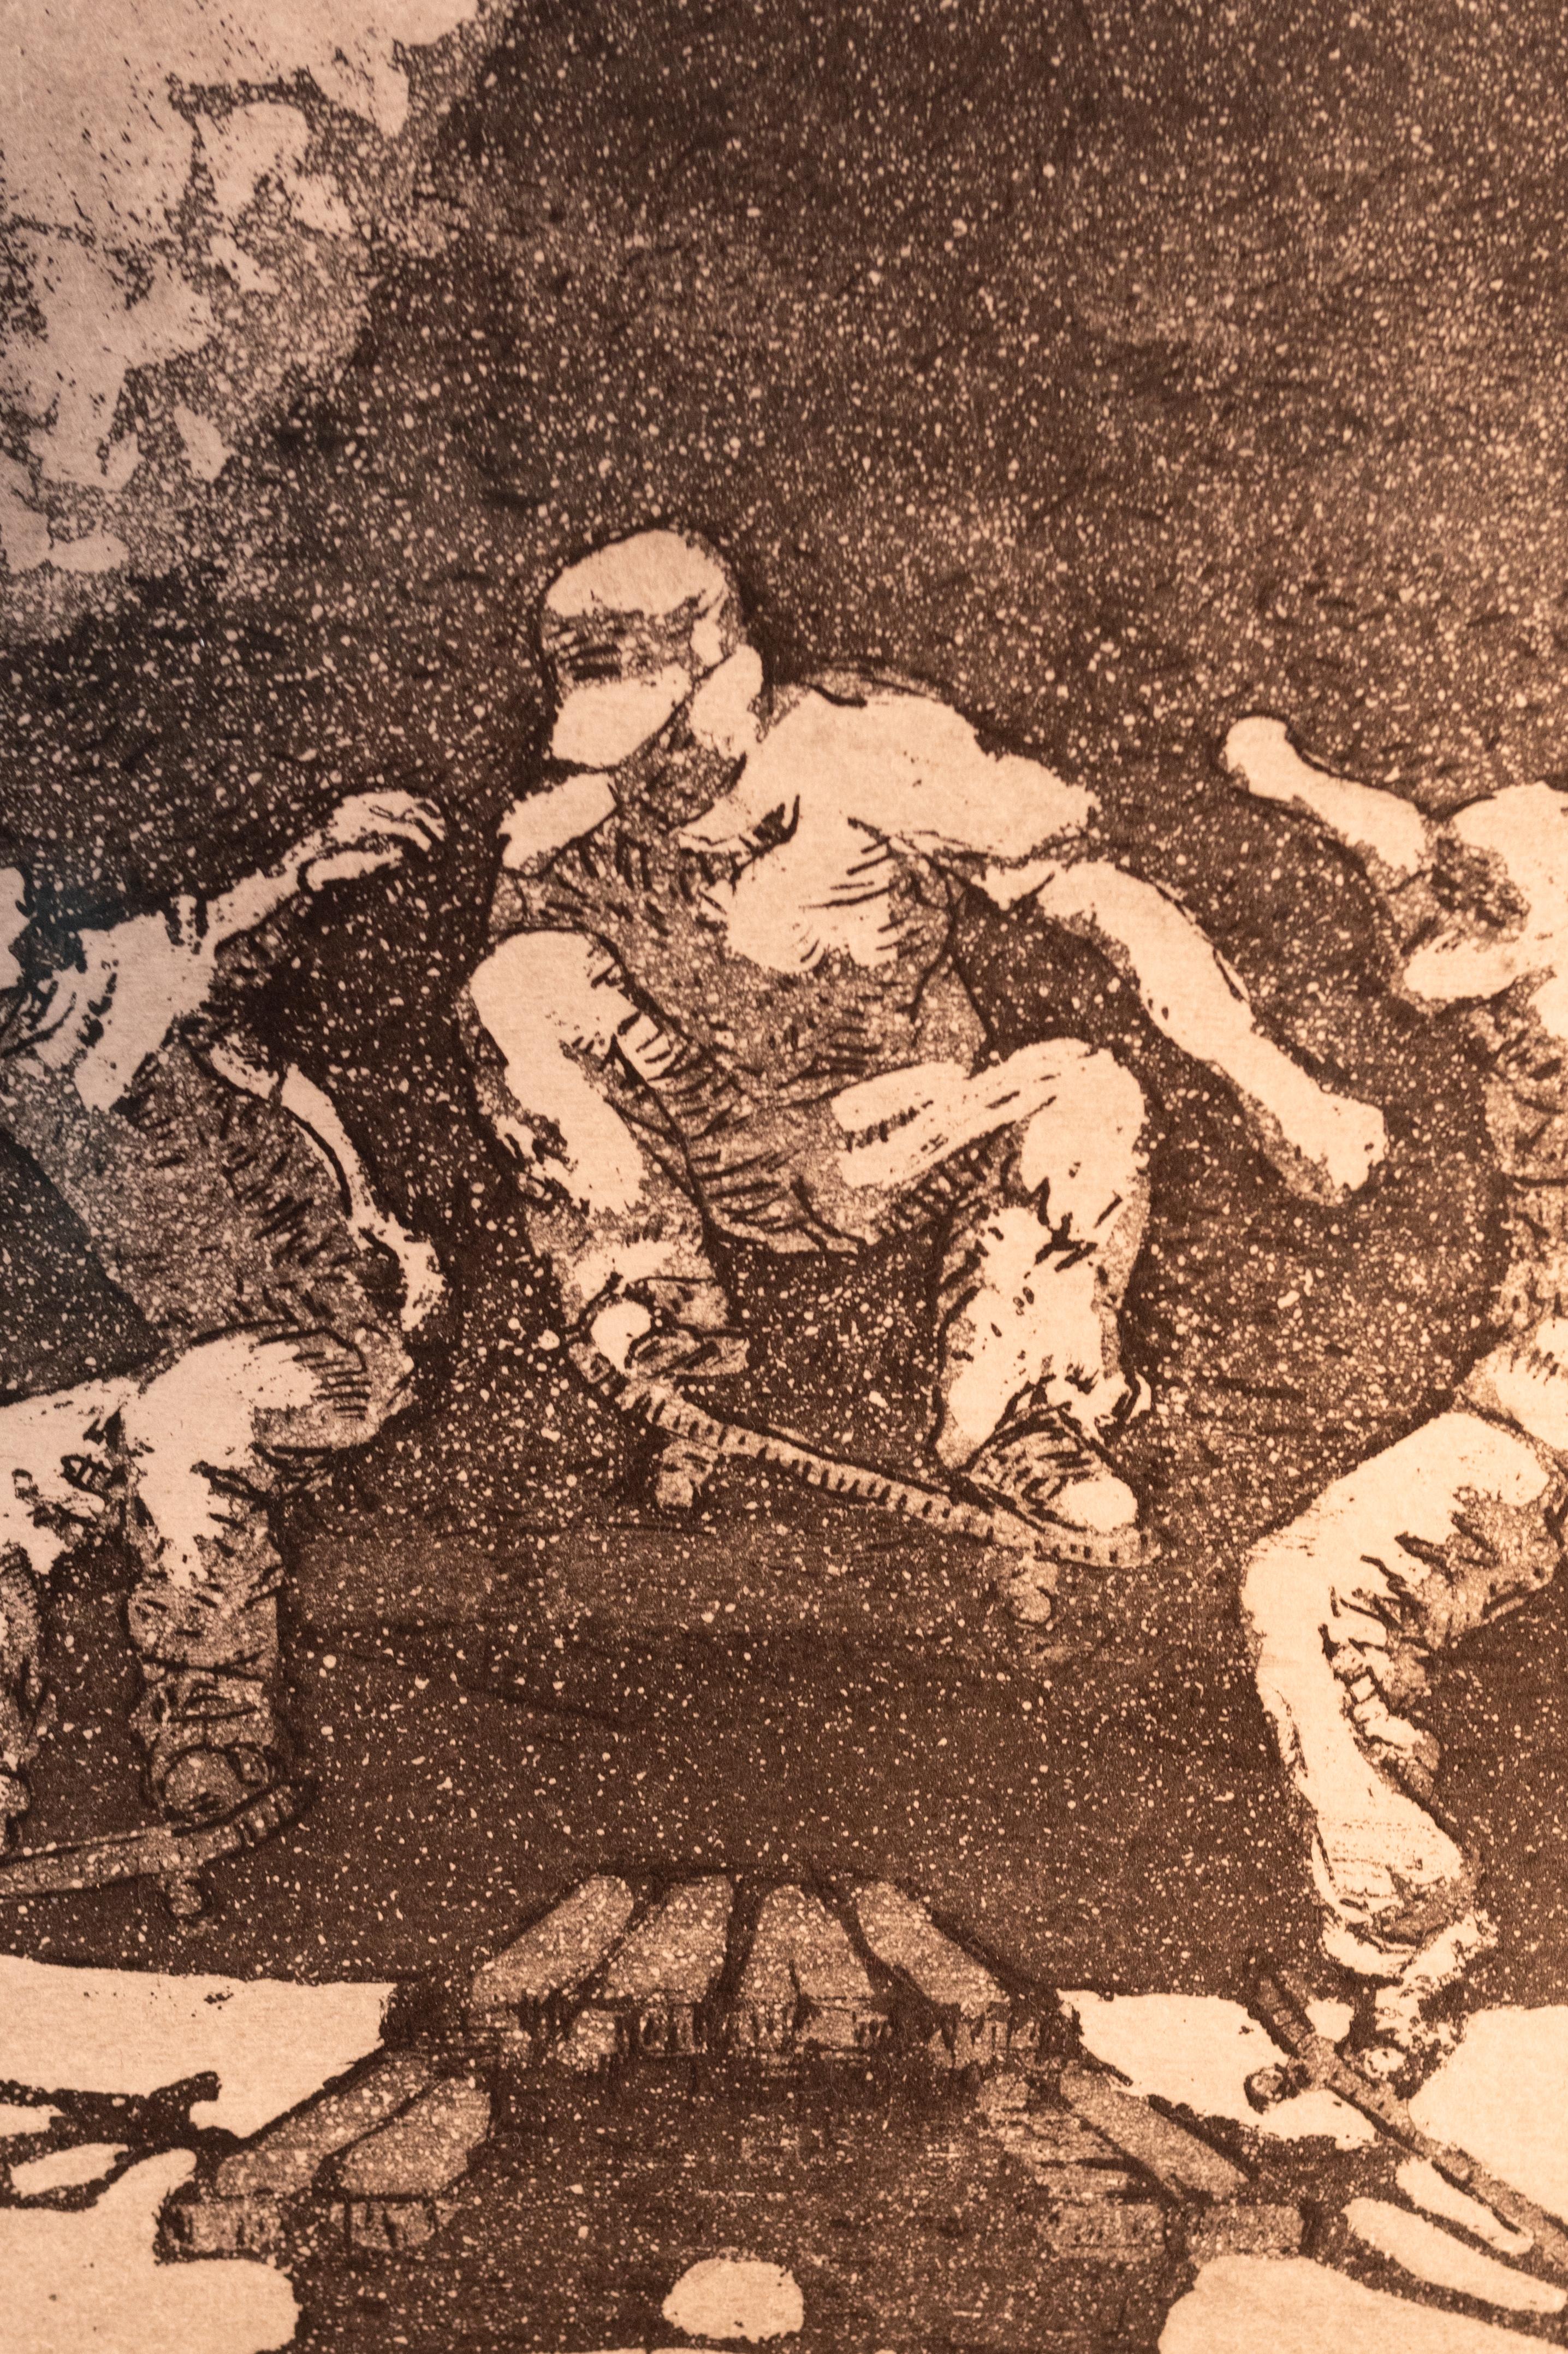 1 etching and 1 aquatint of skating youngsters (2010) - Print by Frederic Marschall